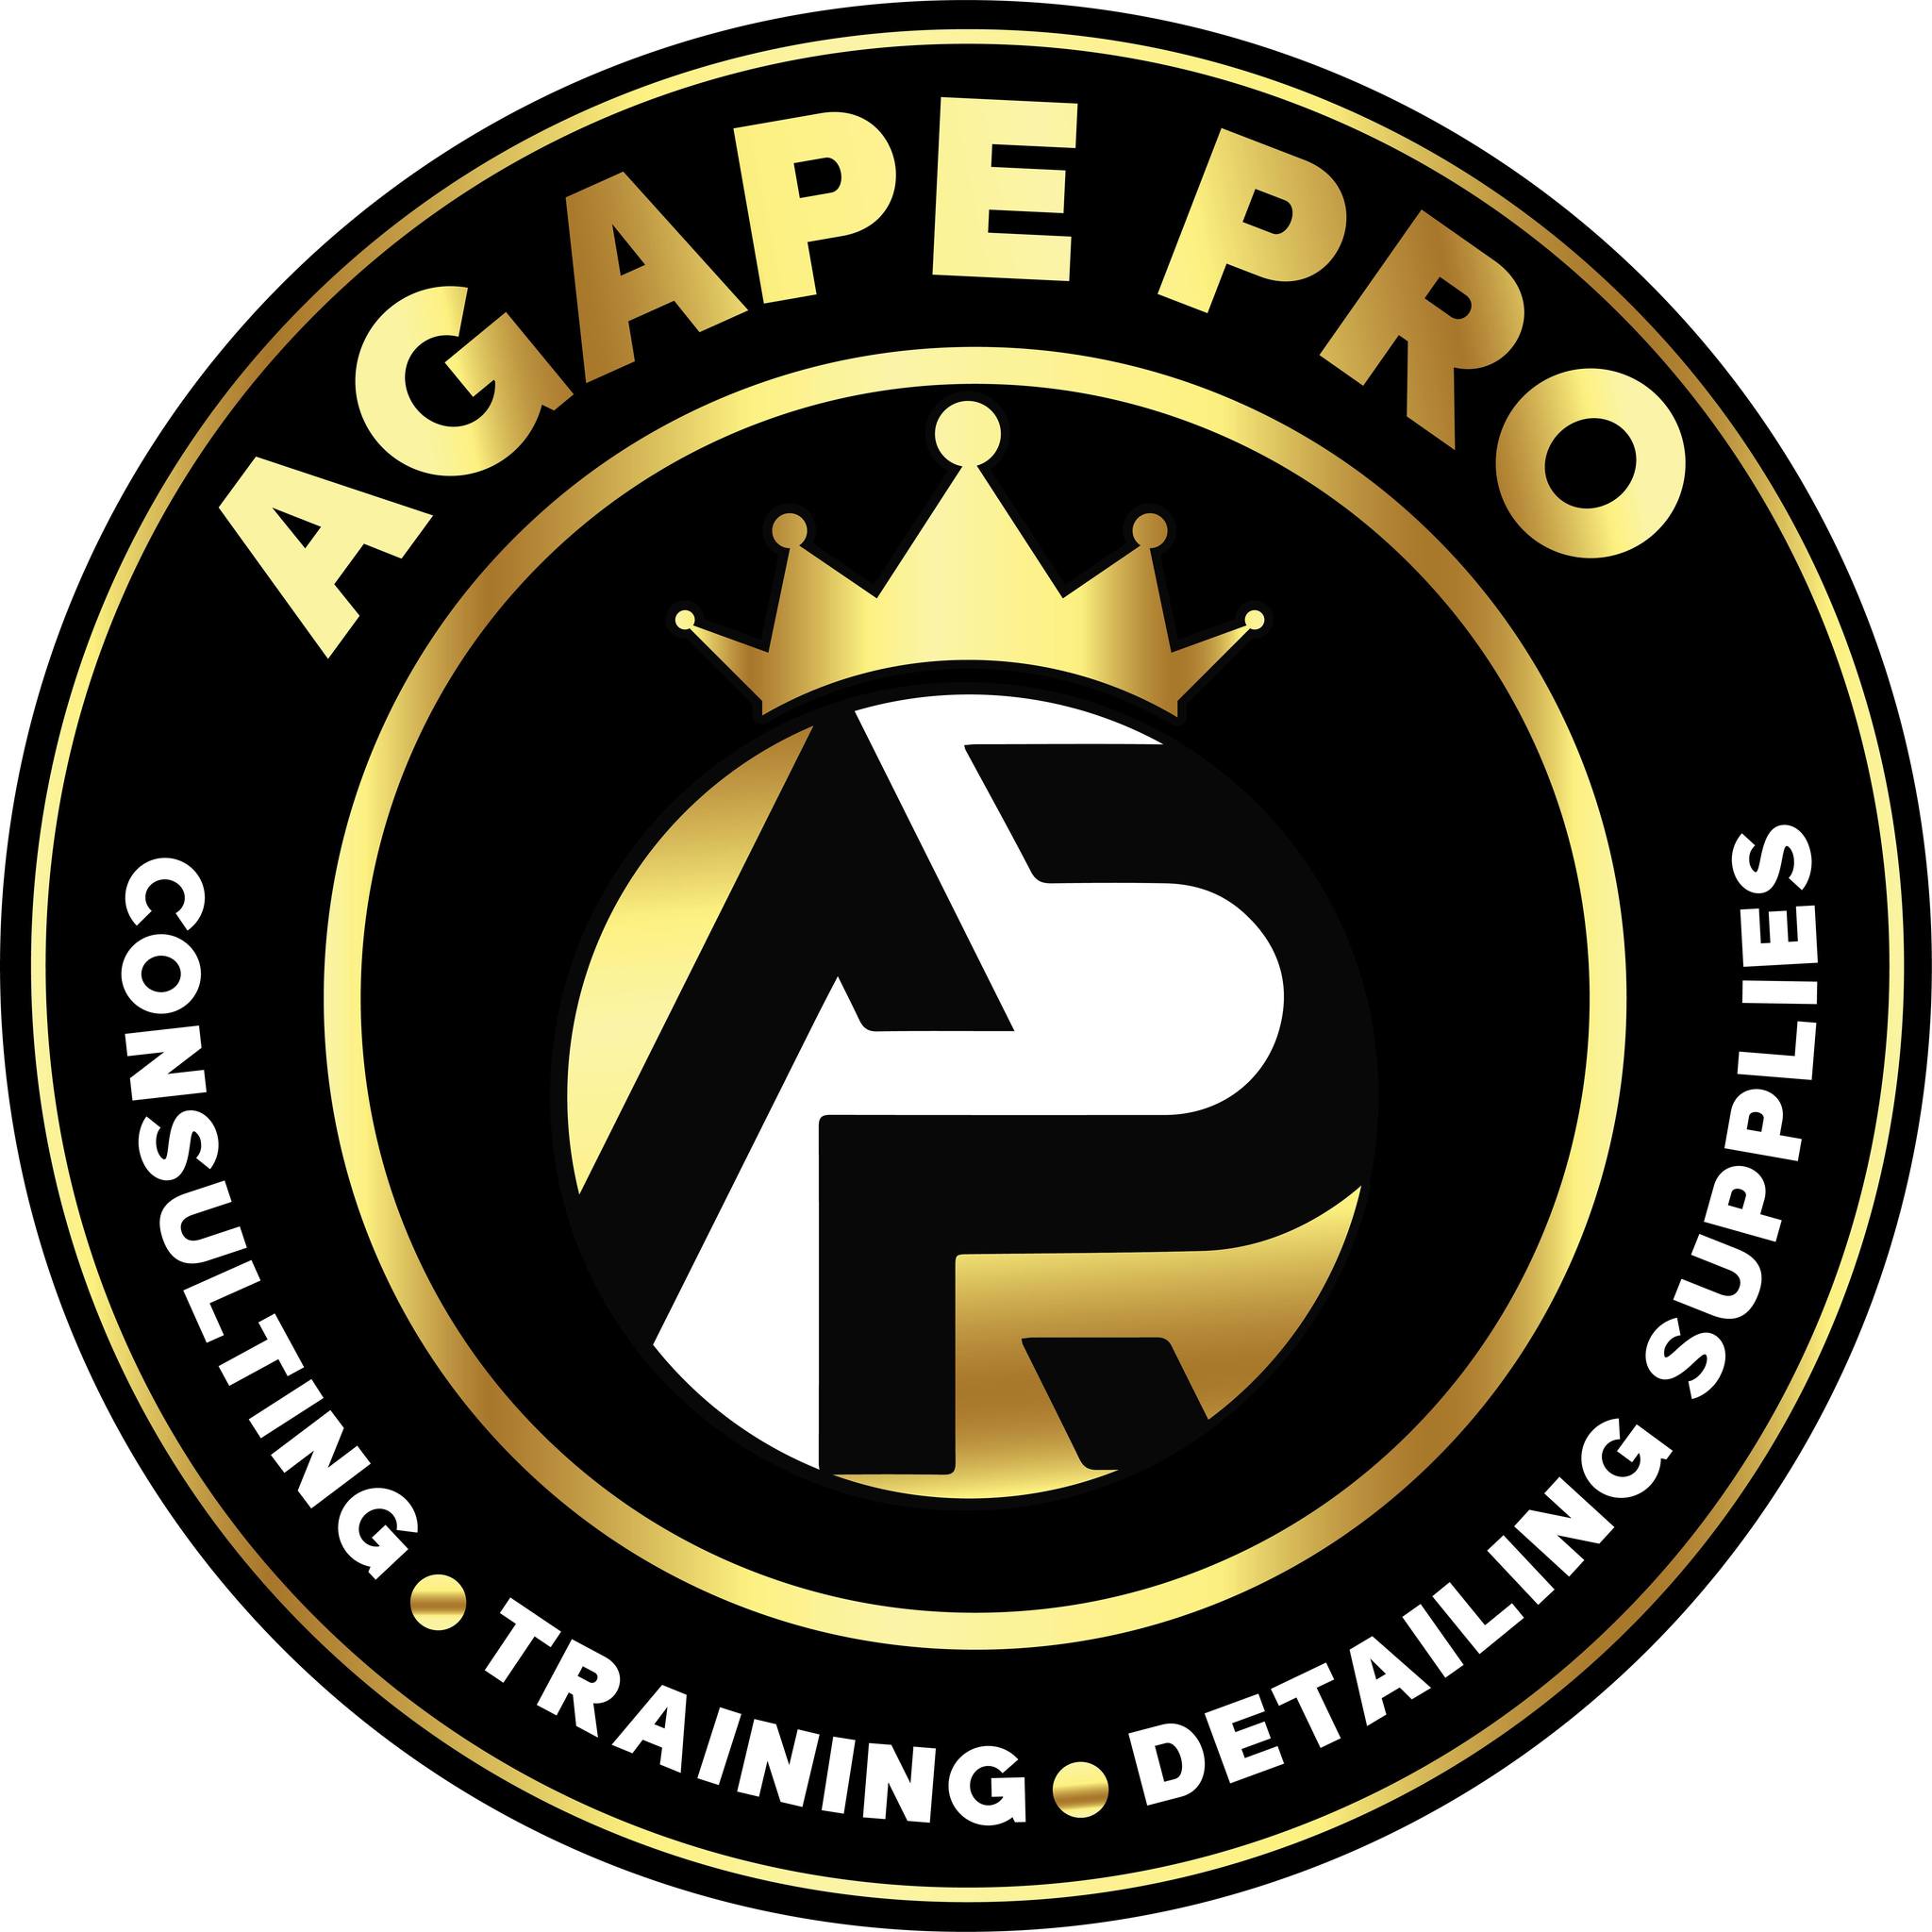 Photos of Our Business - Agape Pro - Photo (177009)